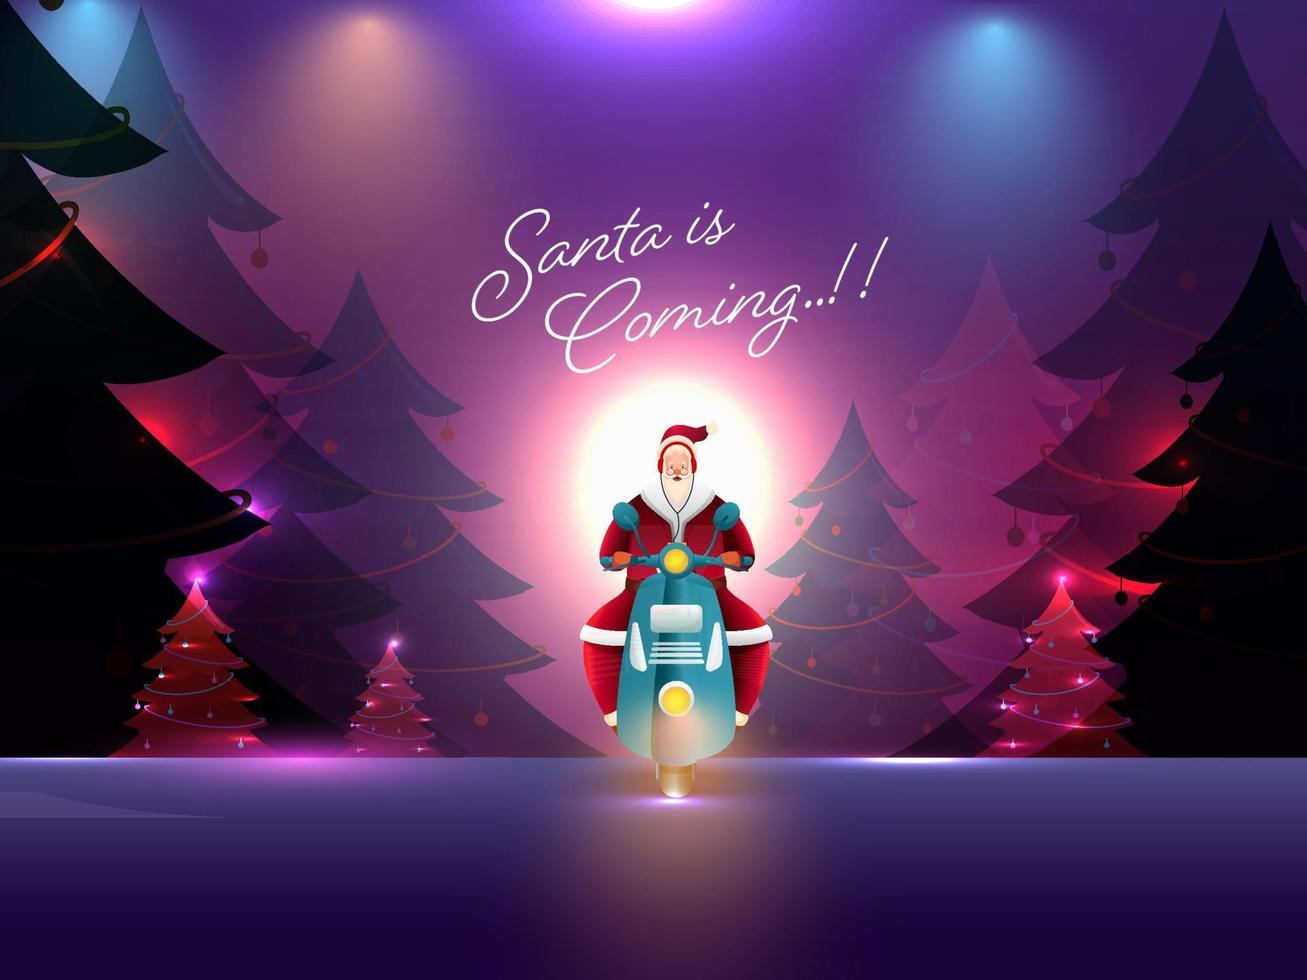 Abstract Lights Focus Background With Decorative Xmas Trees, Santa Claus Riding Scooter And Given Message Santa Is Coming. vector